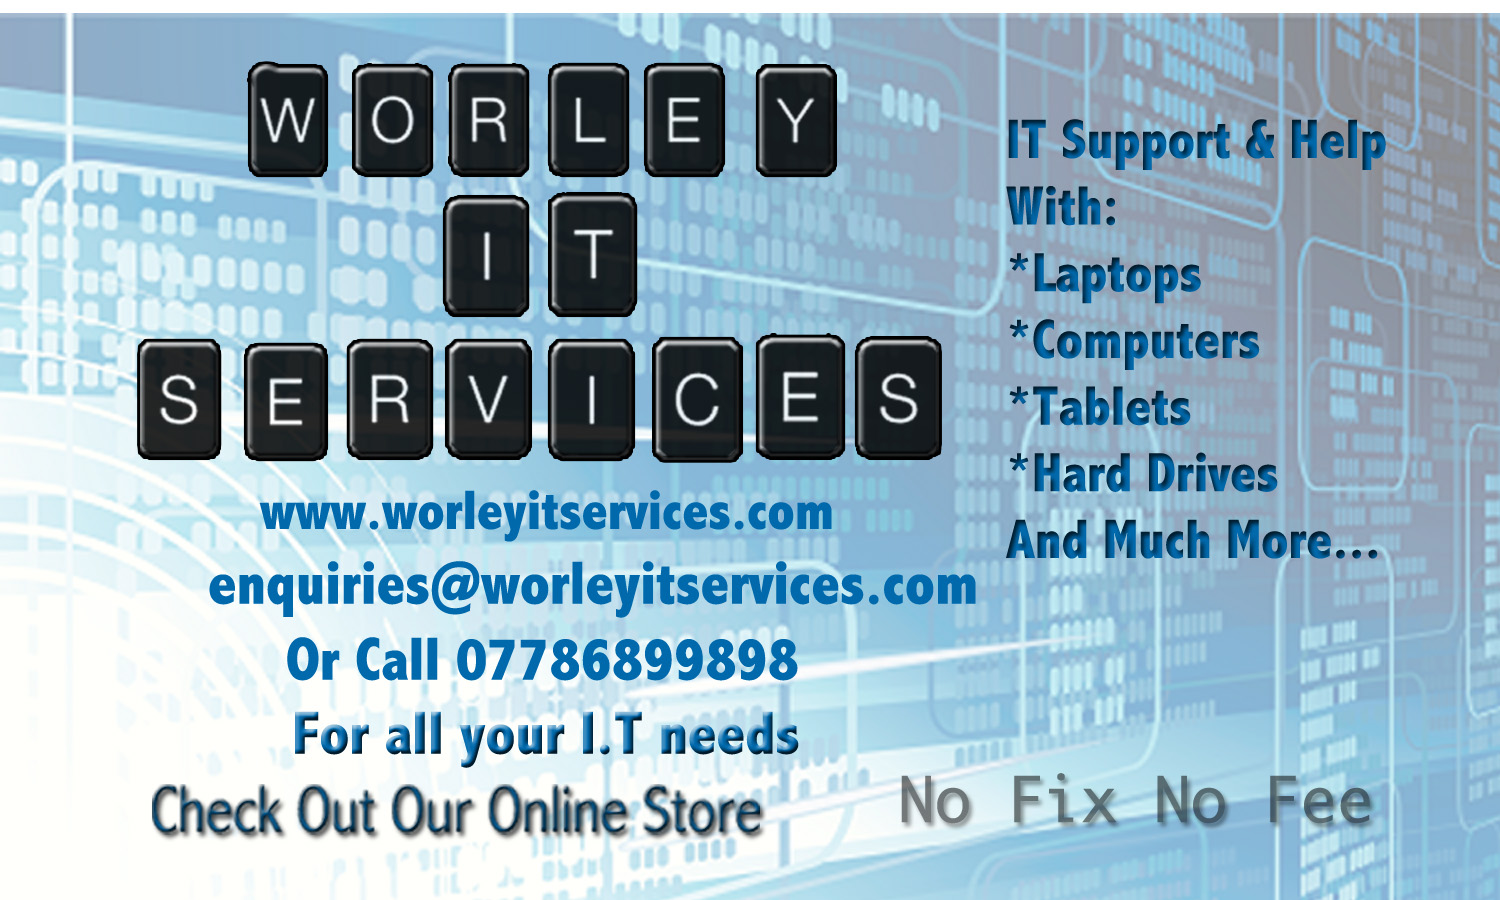 Worley I.T. Services